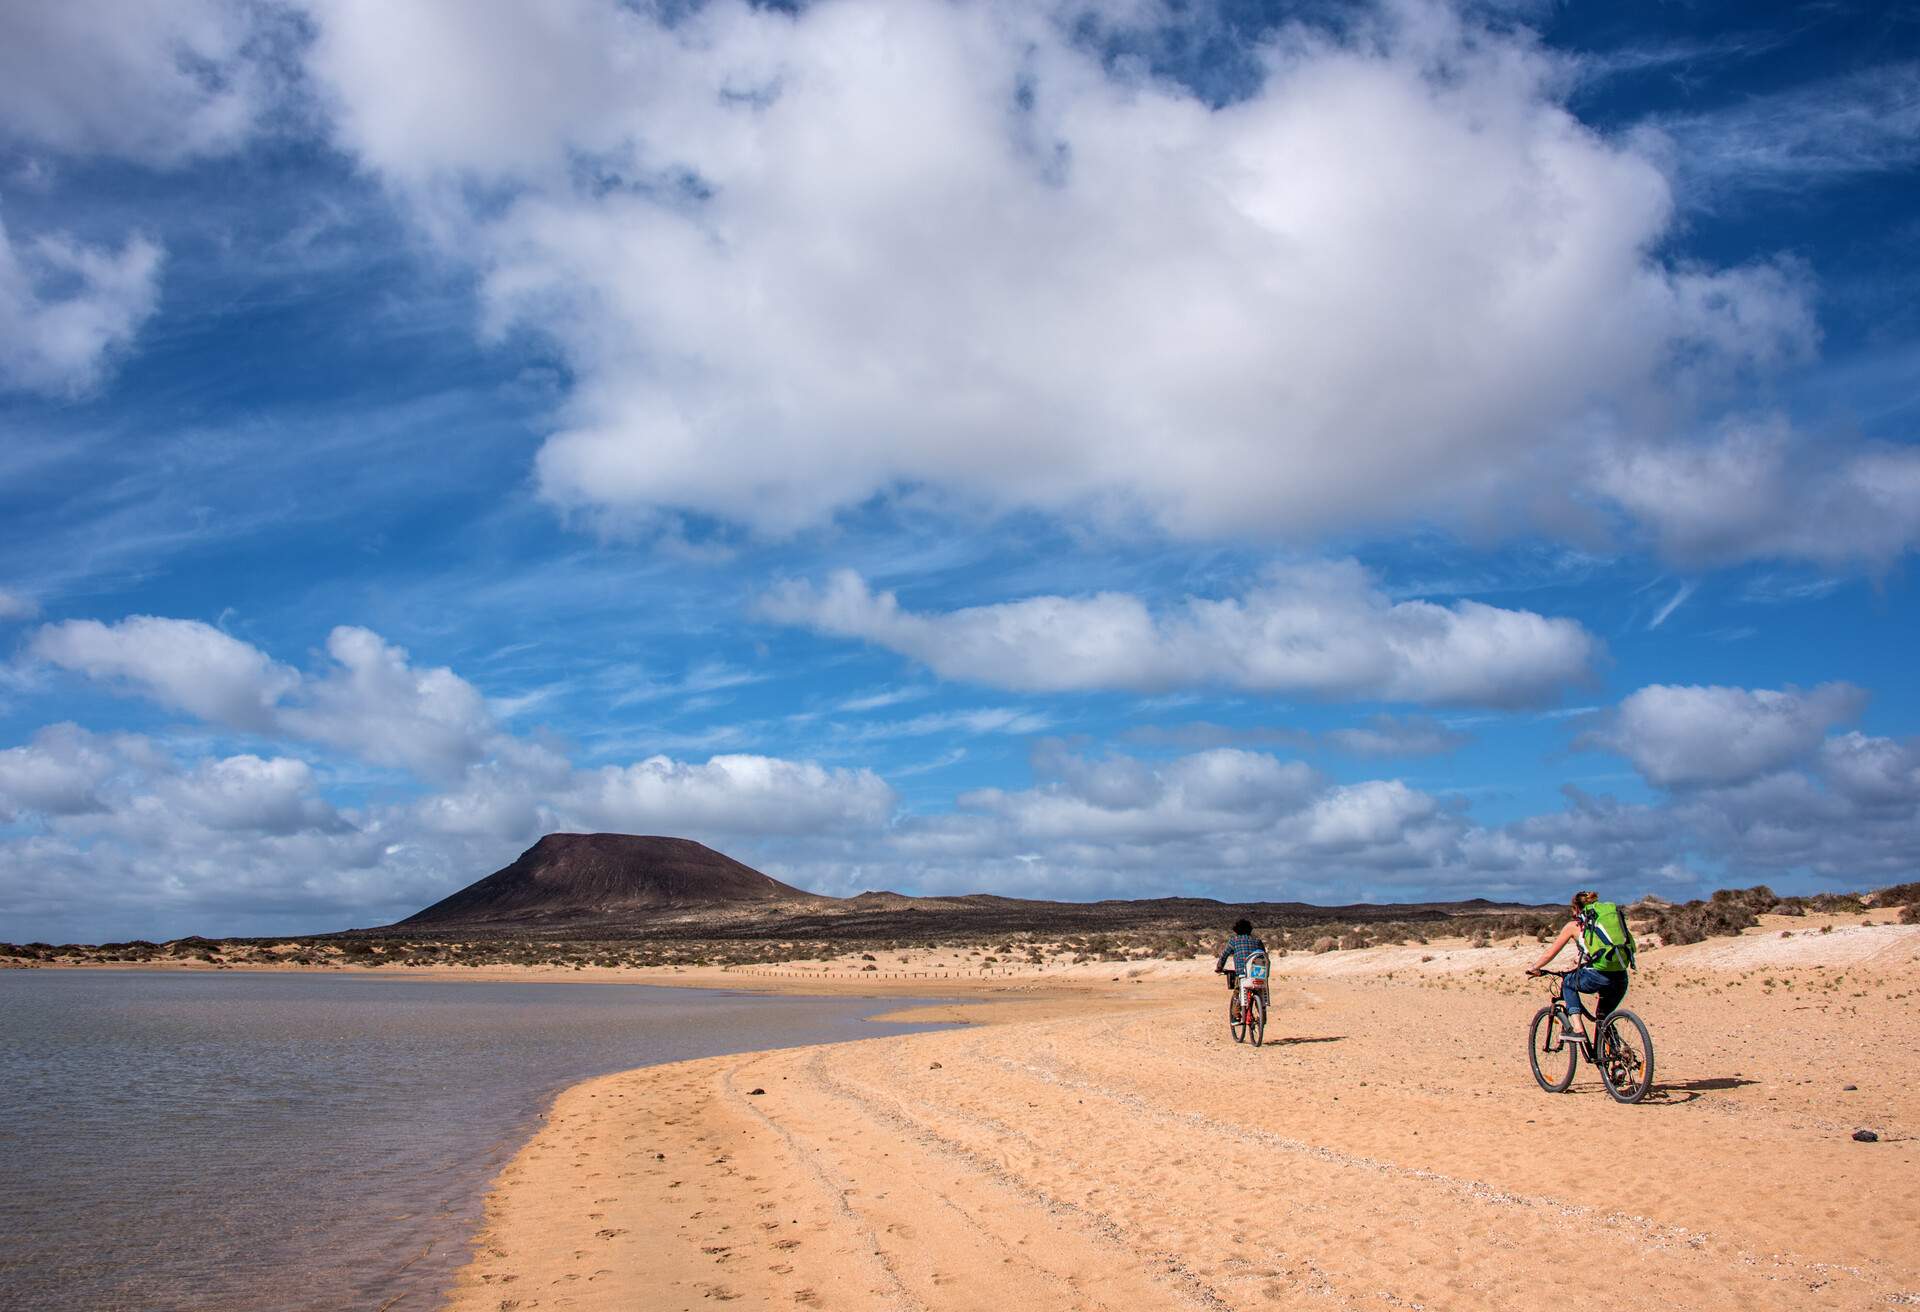 Two people riding their bikes on the sand at the beach with a volcano in the distance.